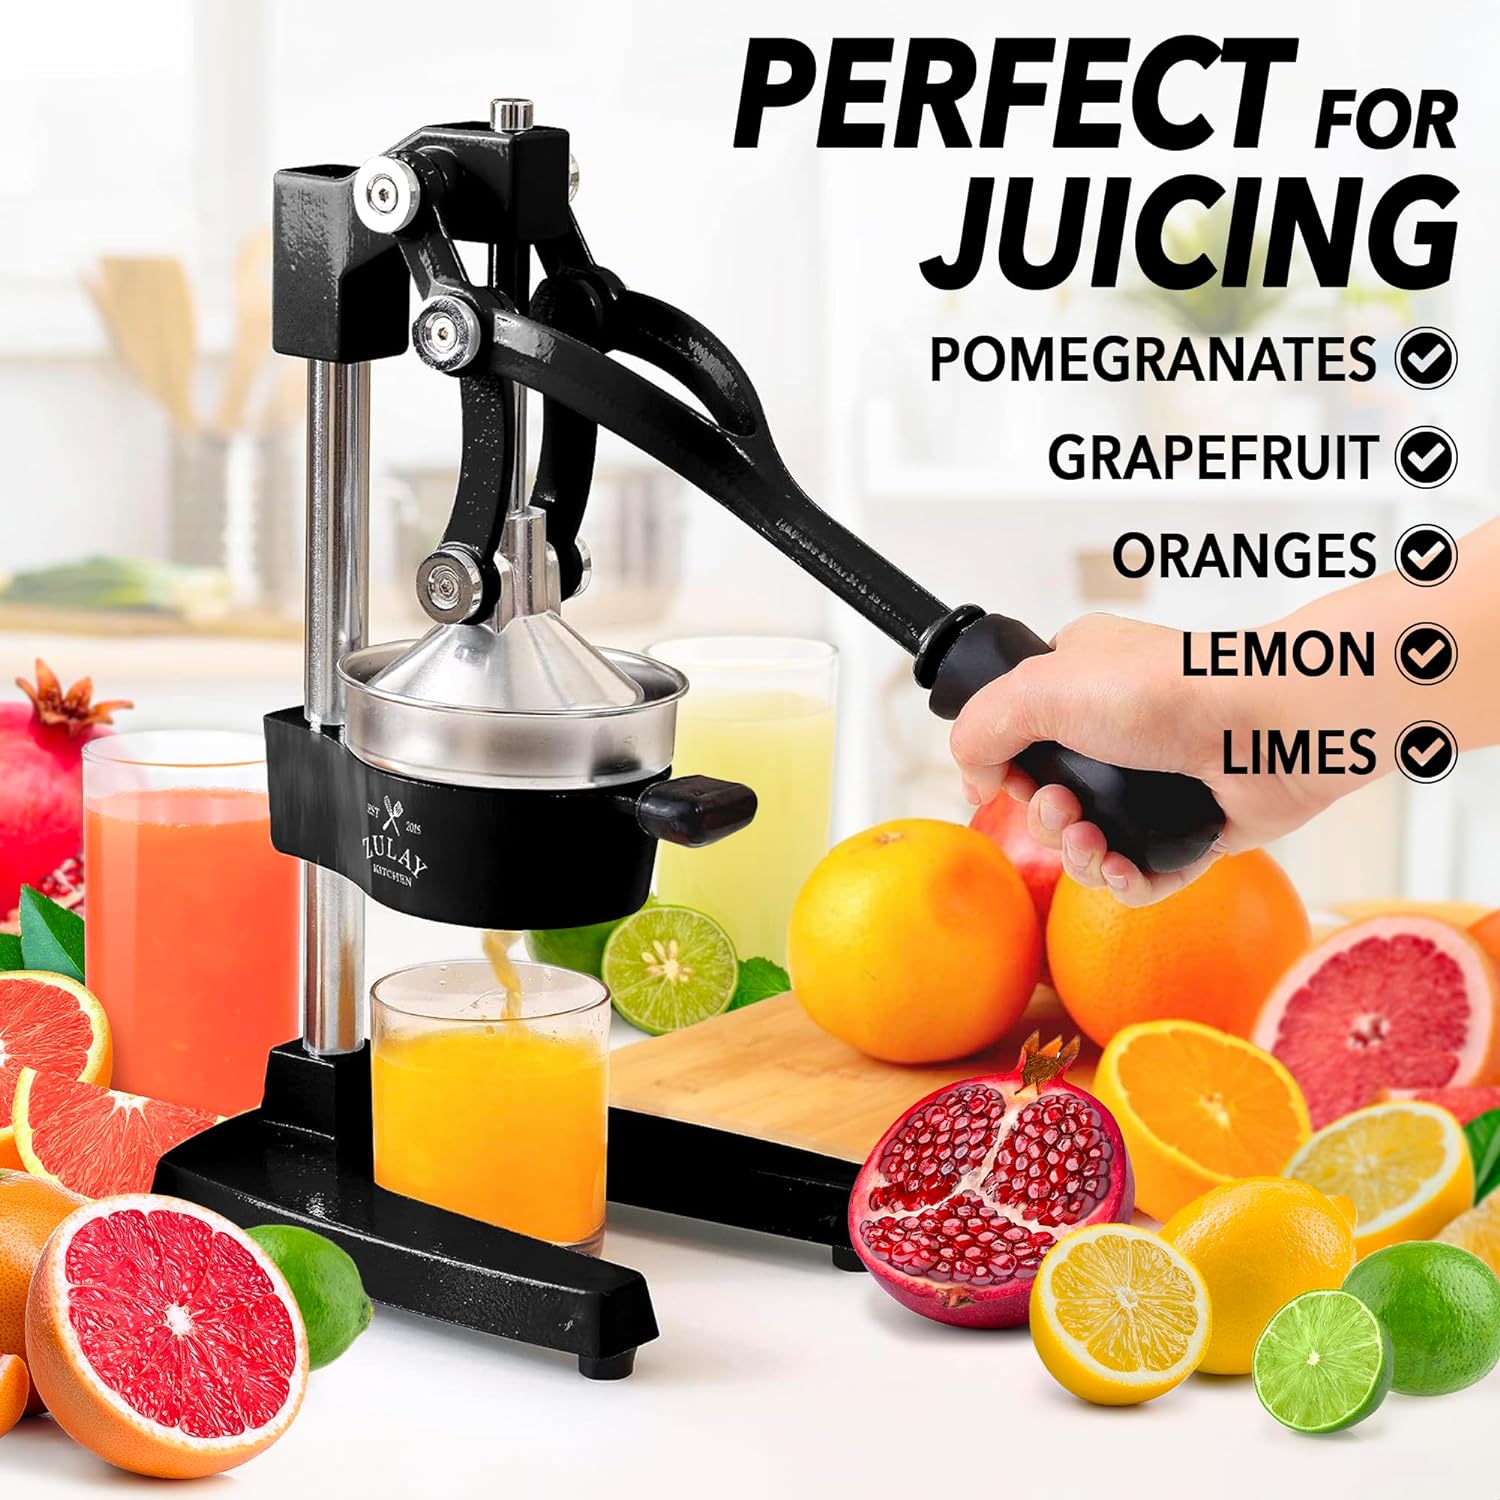 Zulay Kitchen Cast Iron Orange Juicer: Full Review